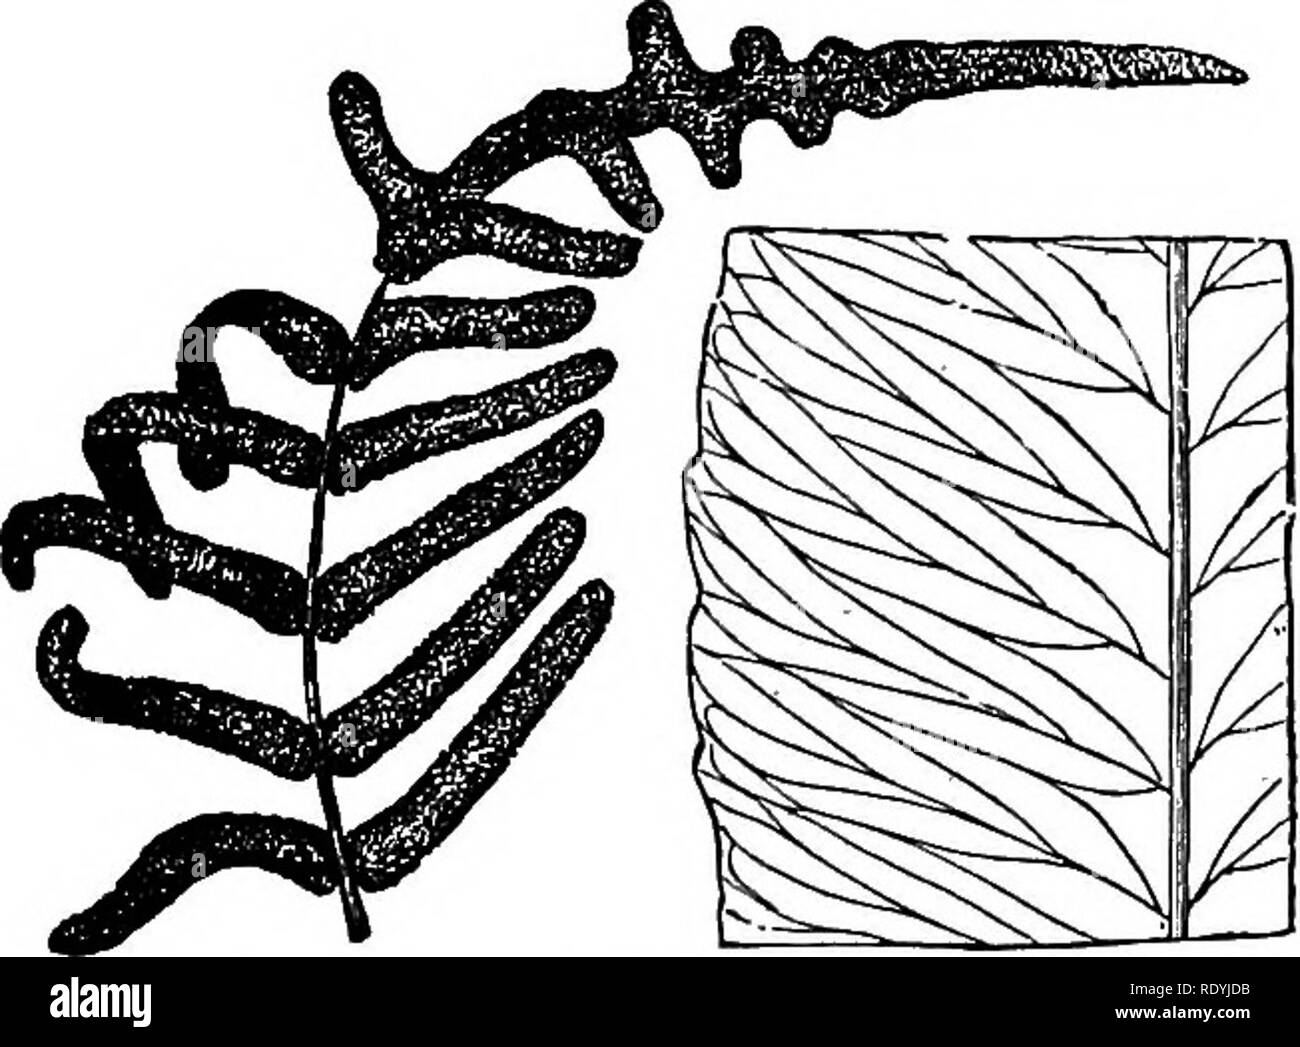 . Ferns: British &amp; foreign. The history, organography, classification, and enumeration of the species of garden ferns with a treatise on their cultivation, etc. etc. Ferns. Genus 39.—Portion of the barren pinna, under side. No. 1. marginal vein. Fertile pinnm linear or pinnatifid, convolute, wholly sporangiferous. 1. O. cervina, Presl; Hooh. Fil. Exot. t. 43; Lowe's Ferns, 7, tt. 39, 40. Acrostichum cervinum, Siv.; Flwm. Fil. 1.154; Hooh. et Grev. Ic. Fil. t. 81. 0. Corcovadensis, Badd. Fil. Bras. t. 14; Hooh. Gen. Fil. t. 79 A. Acrostichum linearifolium, Fresl.—Tropical America, *** Veins Stock Photo